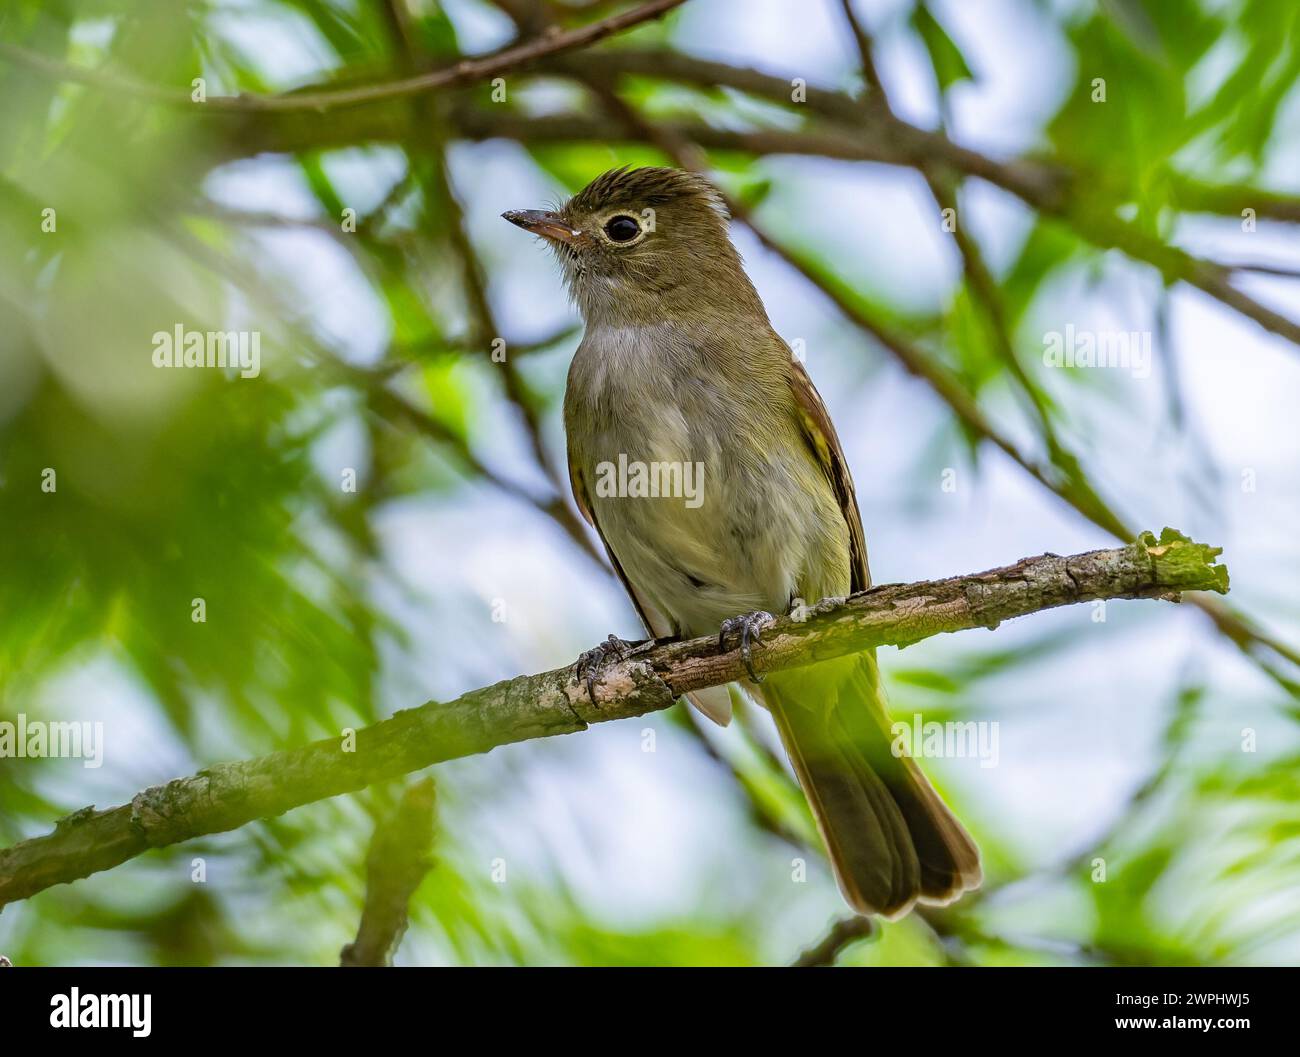 A Small-billed Elaenia (Elaenia parvirostris) perched on a branch. Argentina. Stock Photo